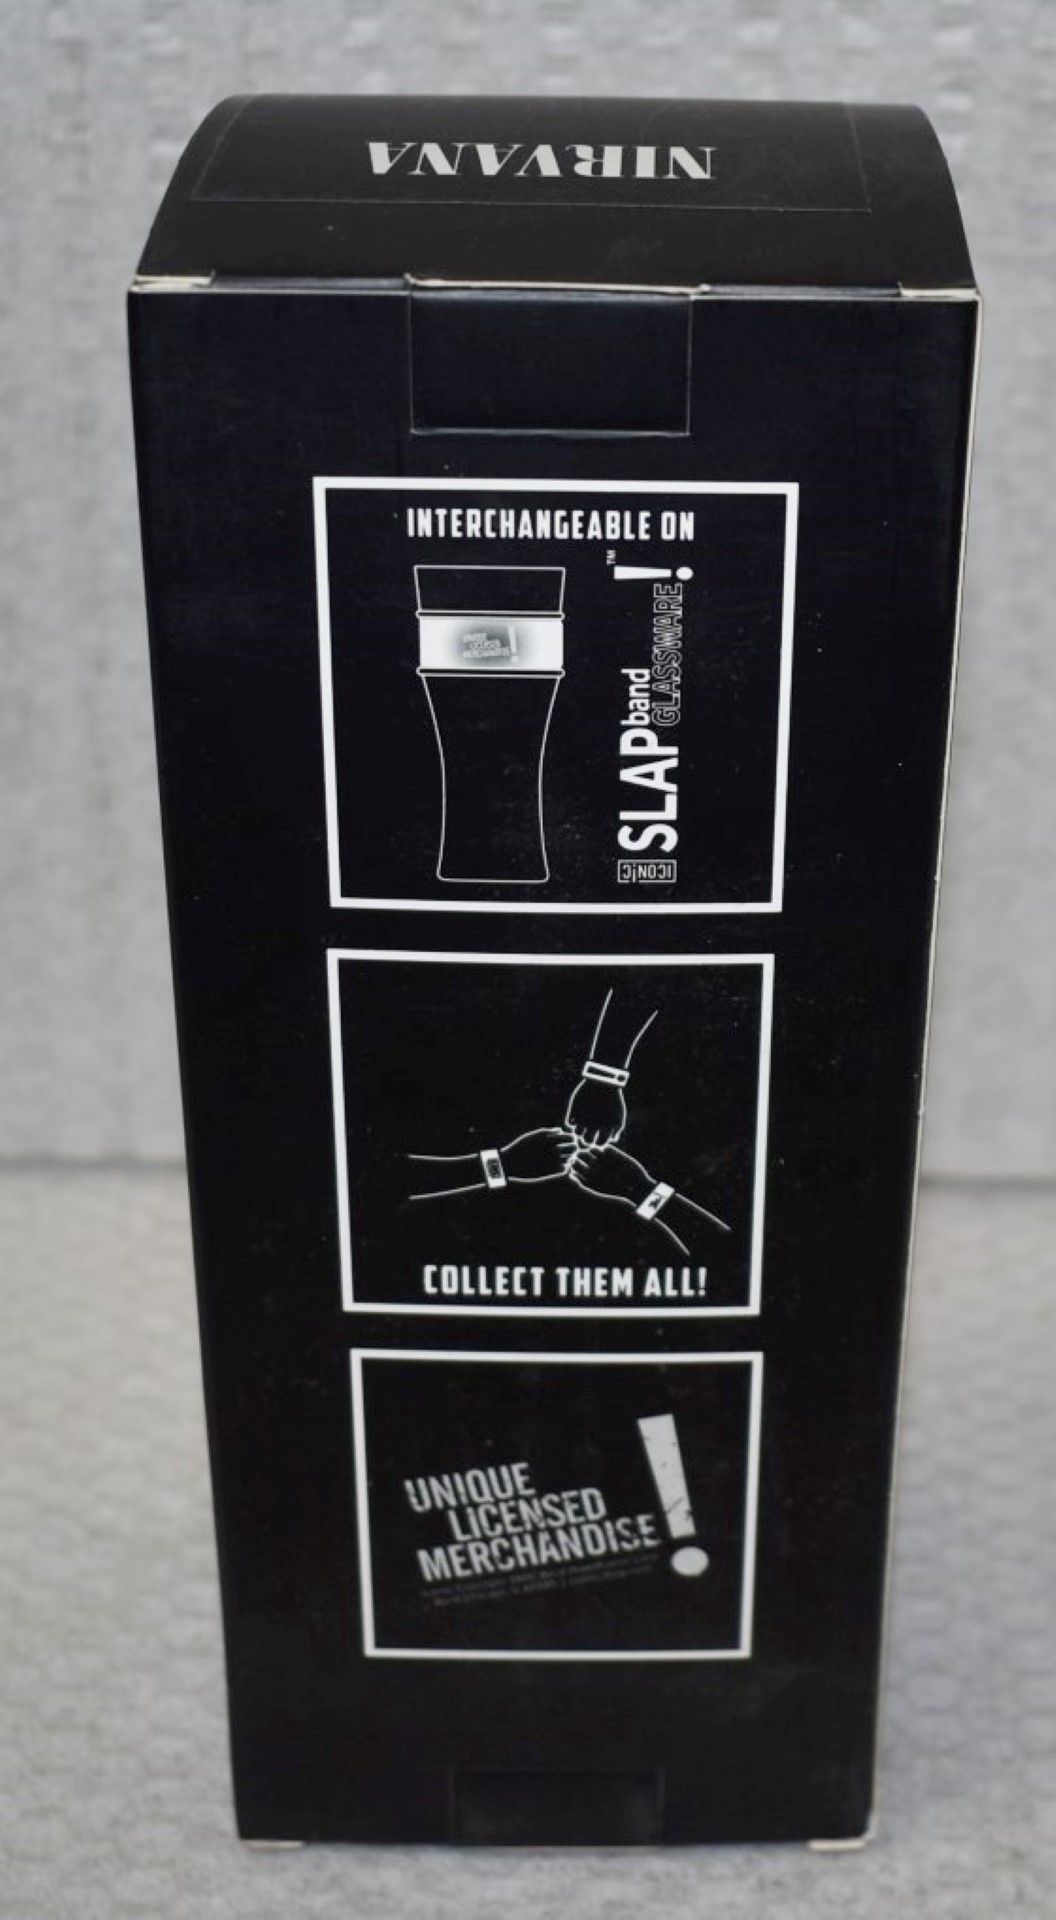 1 x Nirvana Slap Band Drinking Glass With Gift Box - Officially Licensed Merchandise - New & Unused - Image 3 of 7